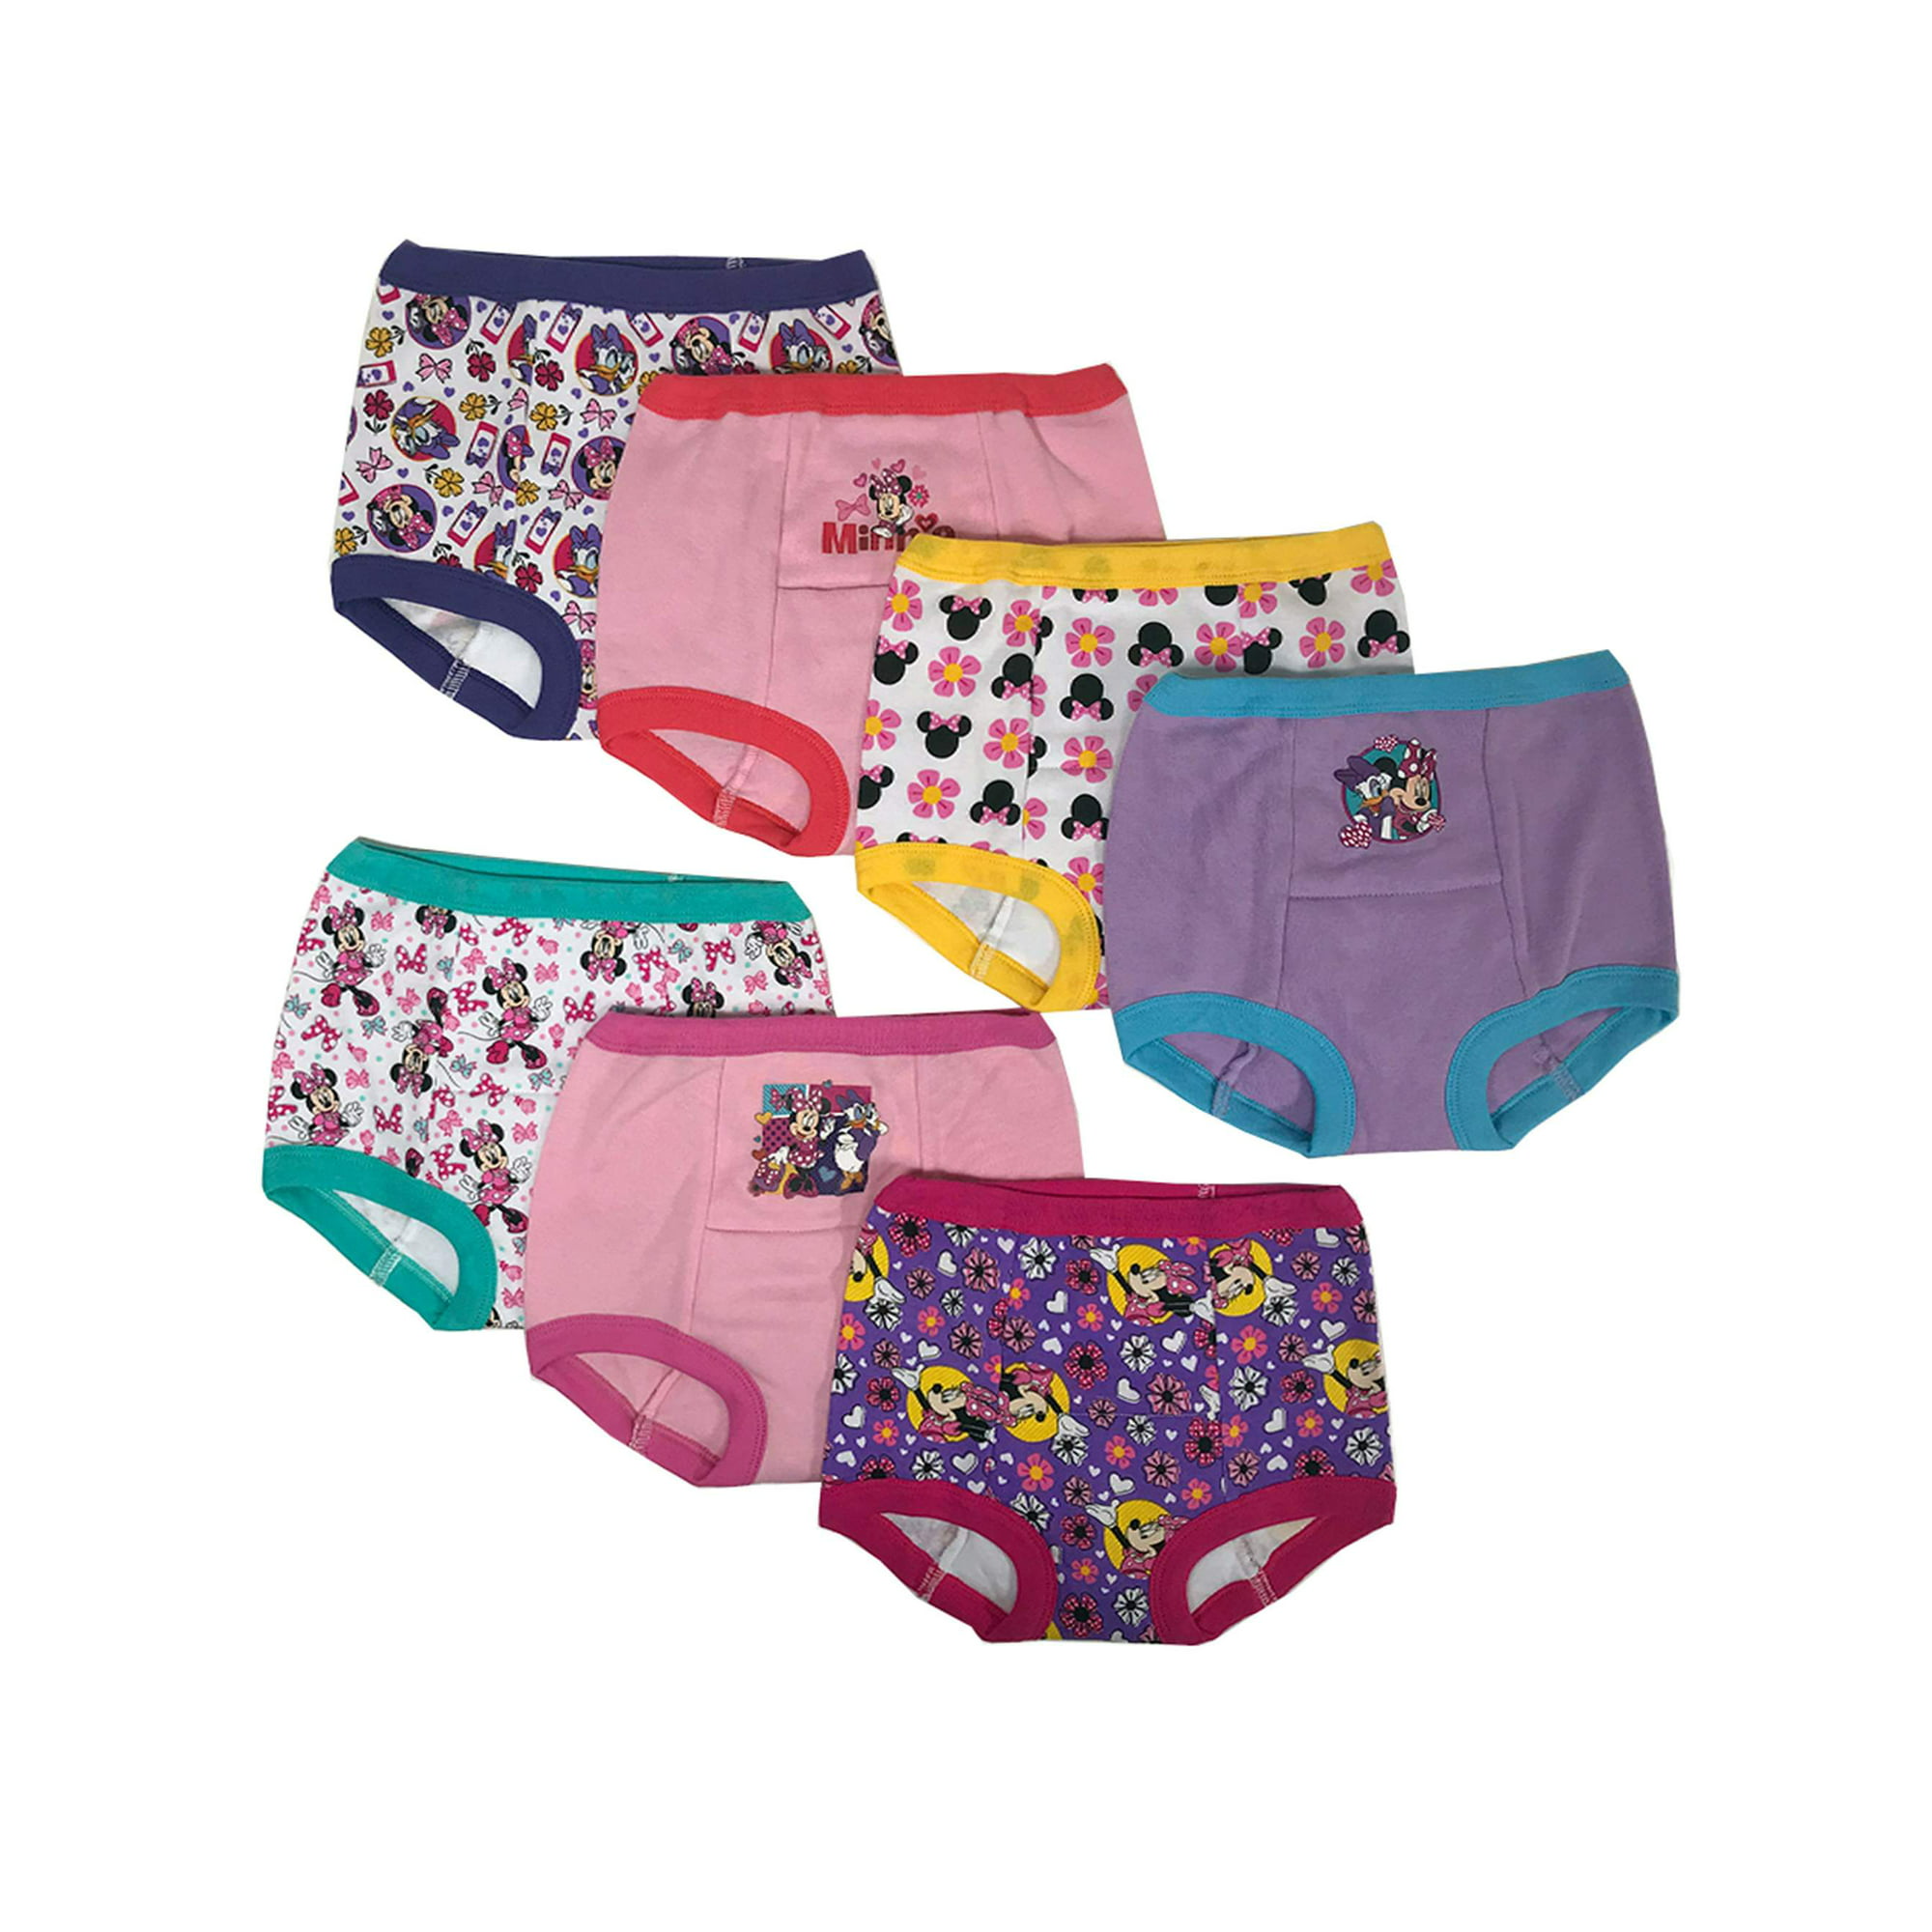 Minnie Mouse Toddler Girl Training Underwear, 7-Pack, Sizes, 54% OFF